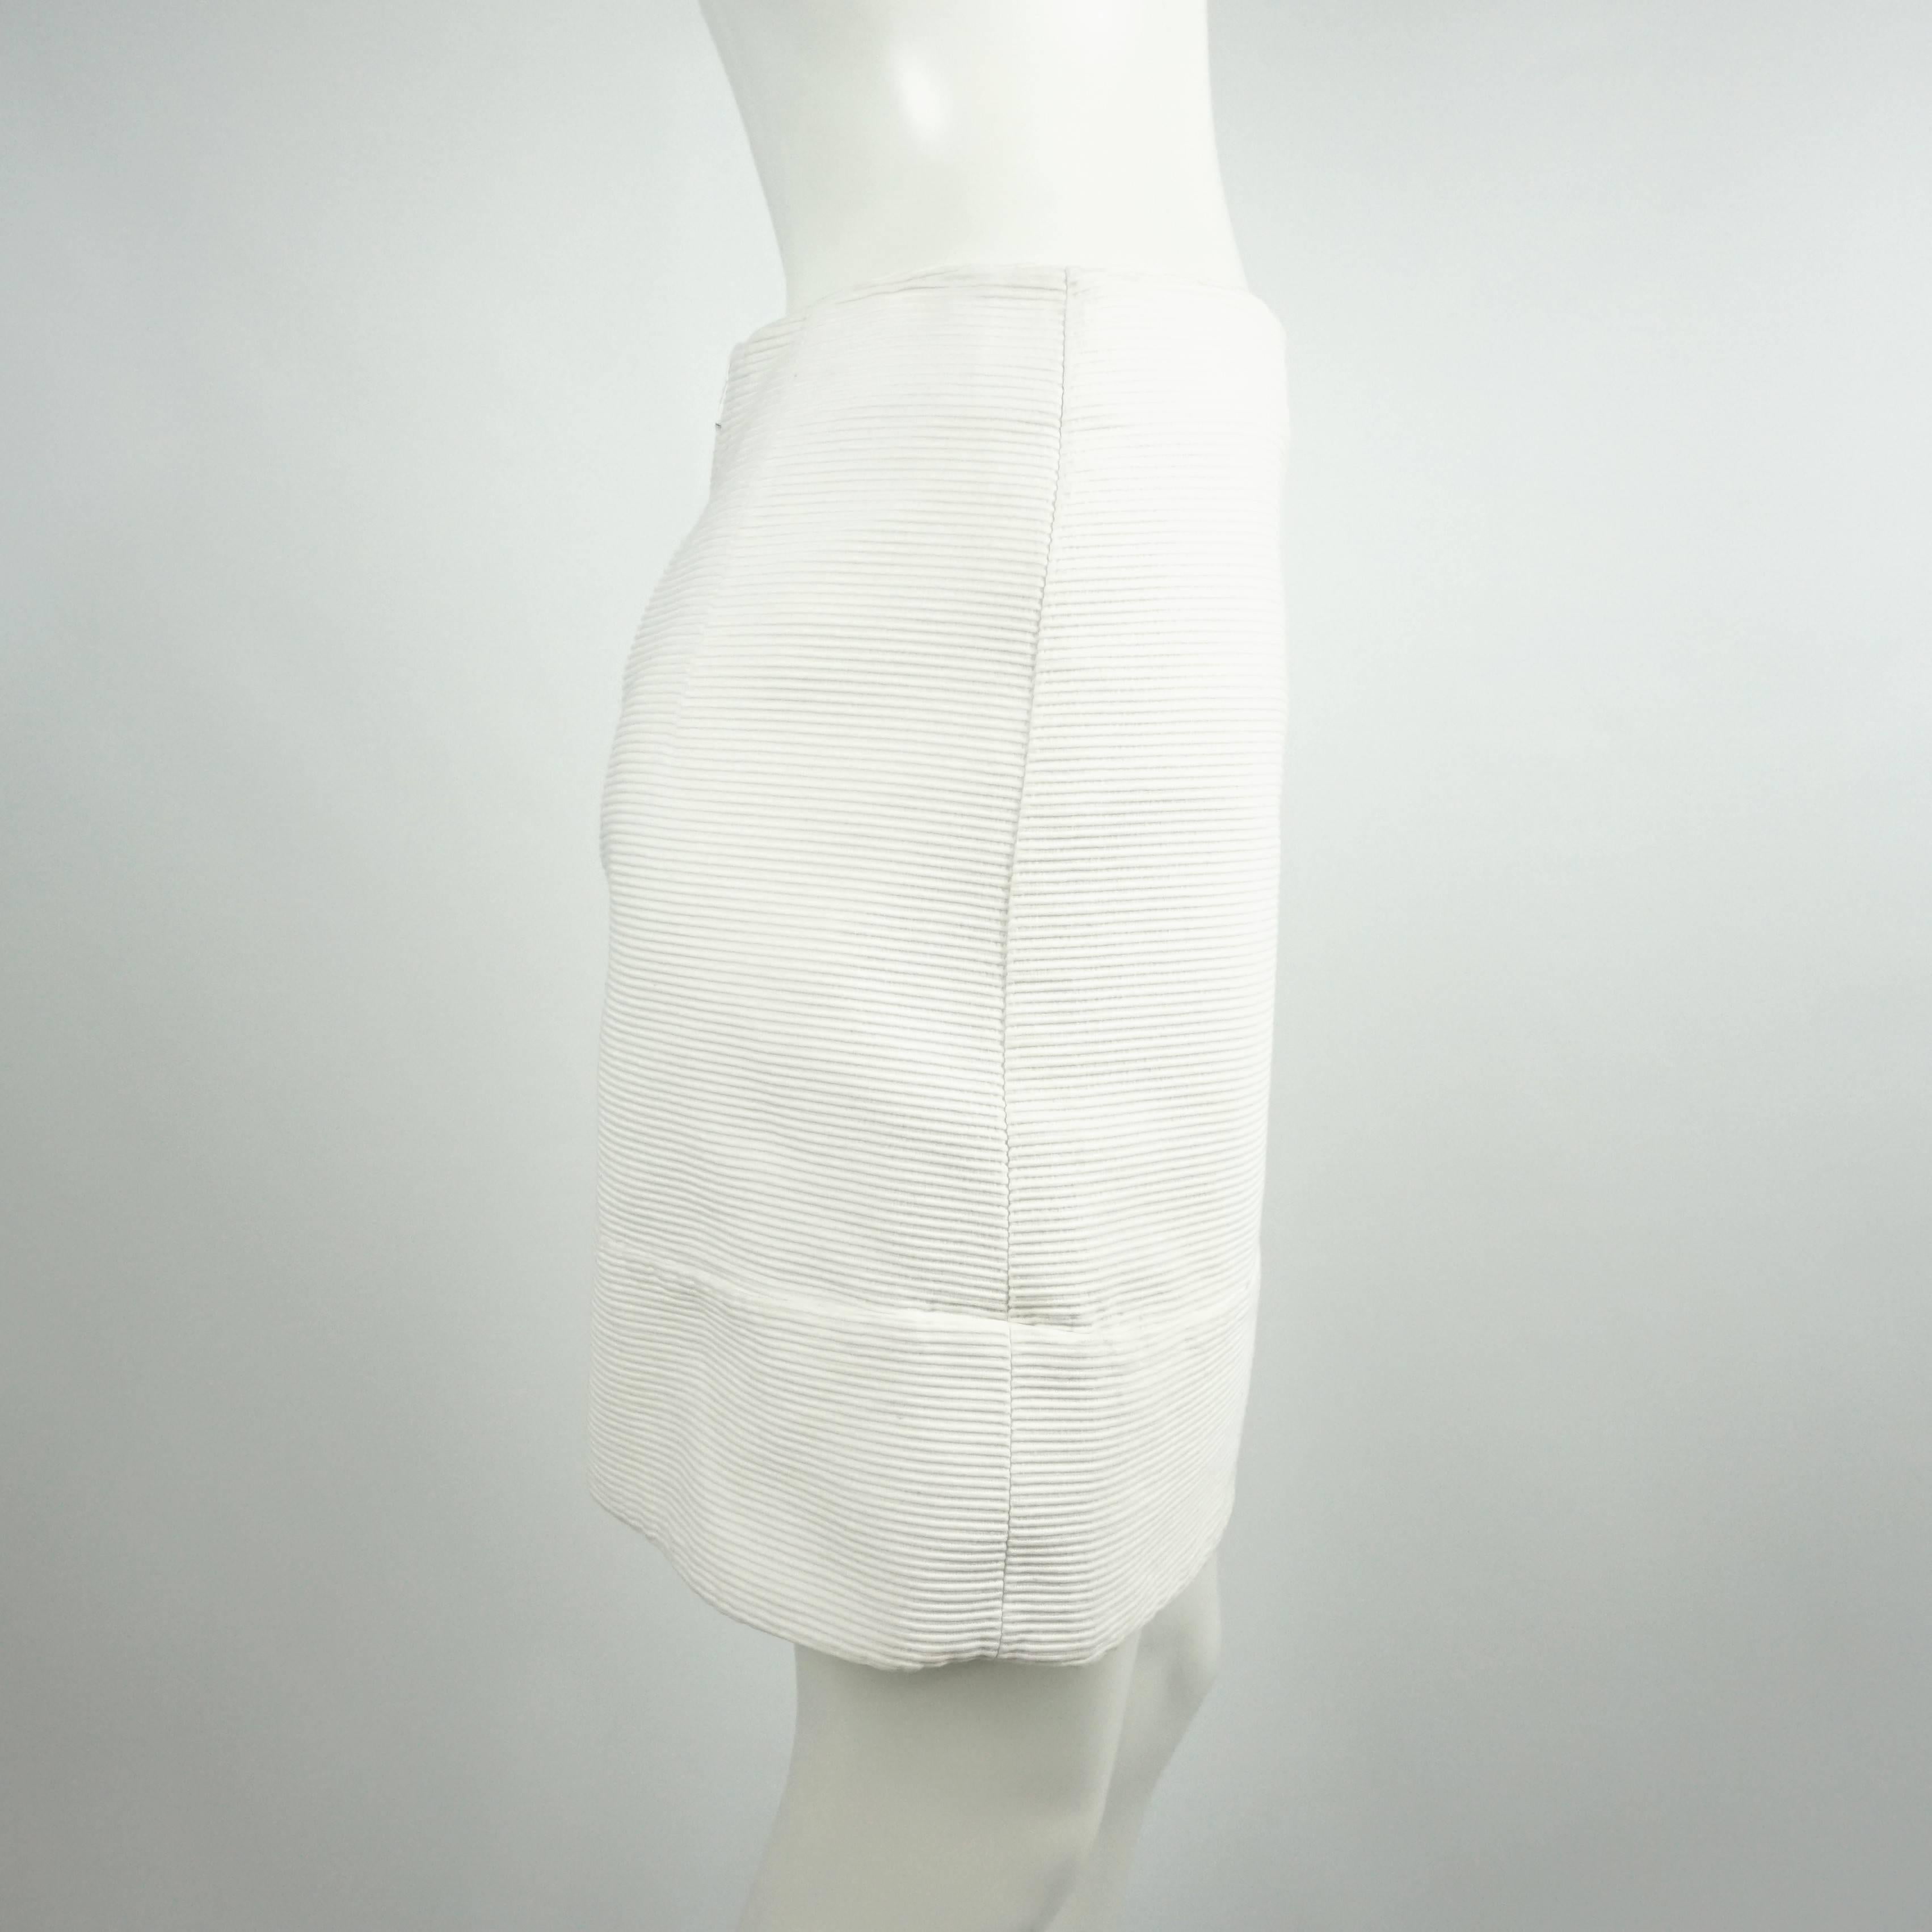 This Chloe white ribbed cotton skirt is fully lined in silk and has a straight cut. The fabric is ribbed and has a bottom section creating the illusion of a trim. The skirt also zips in the back with a "Chloe" logo white zipper. The piece